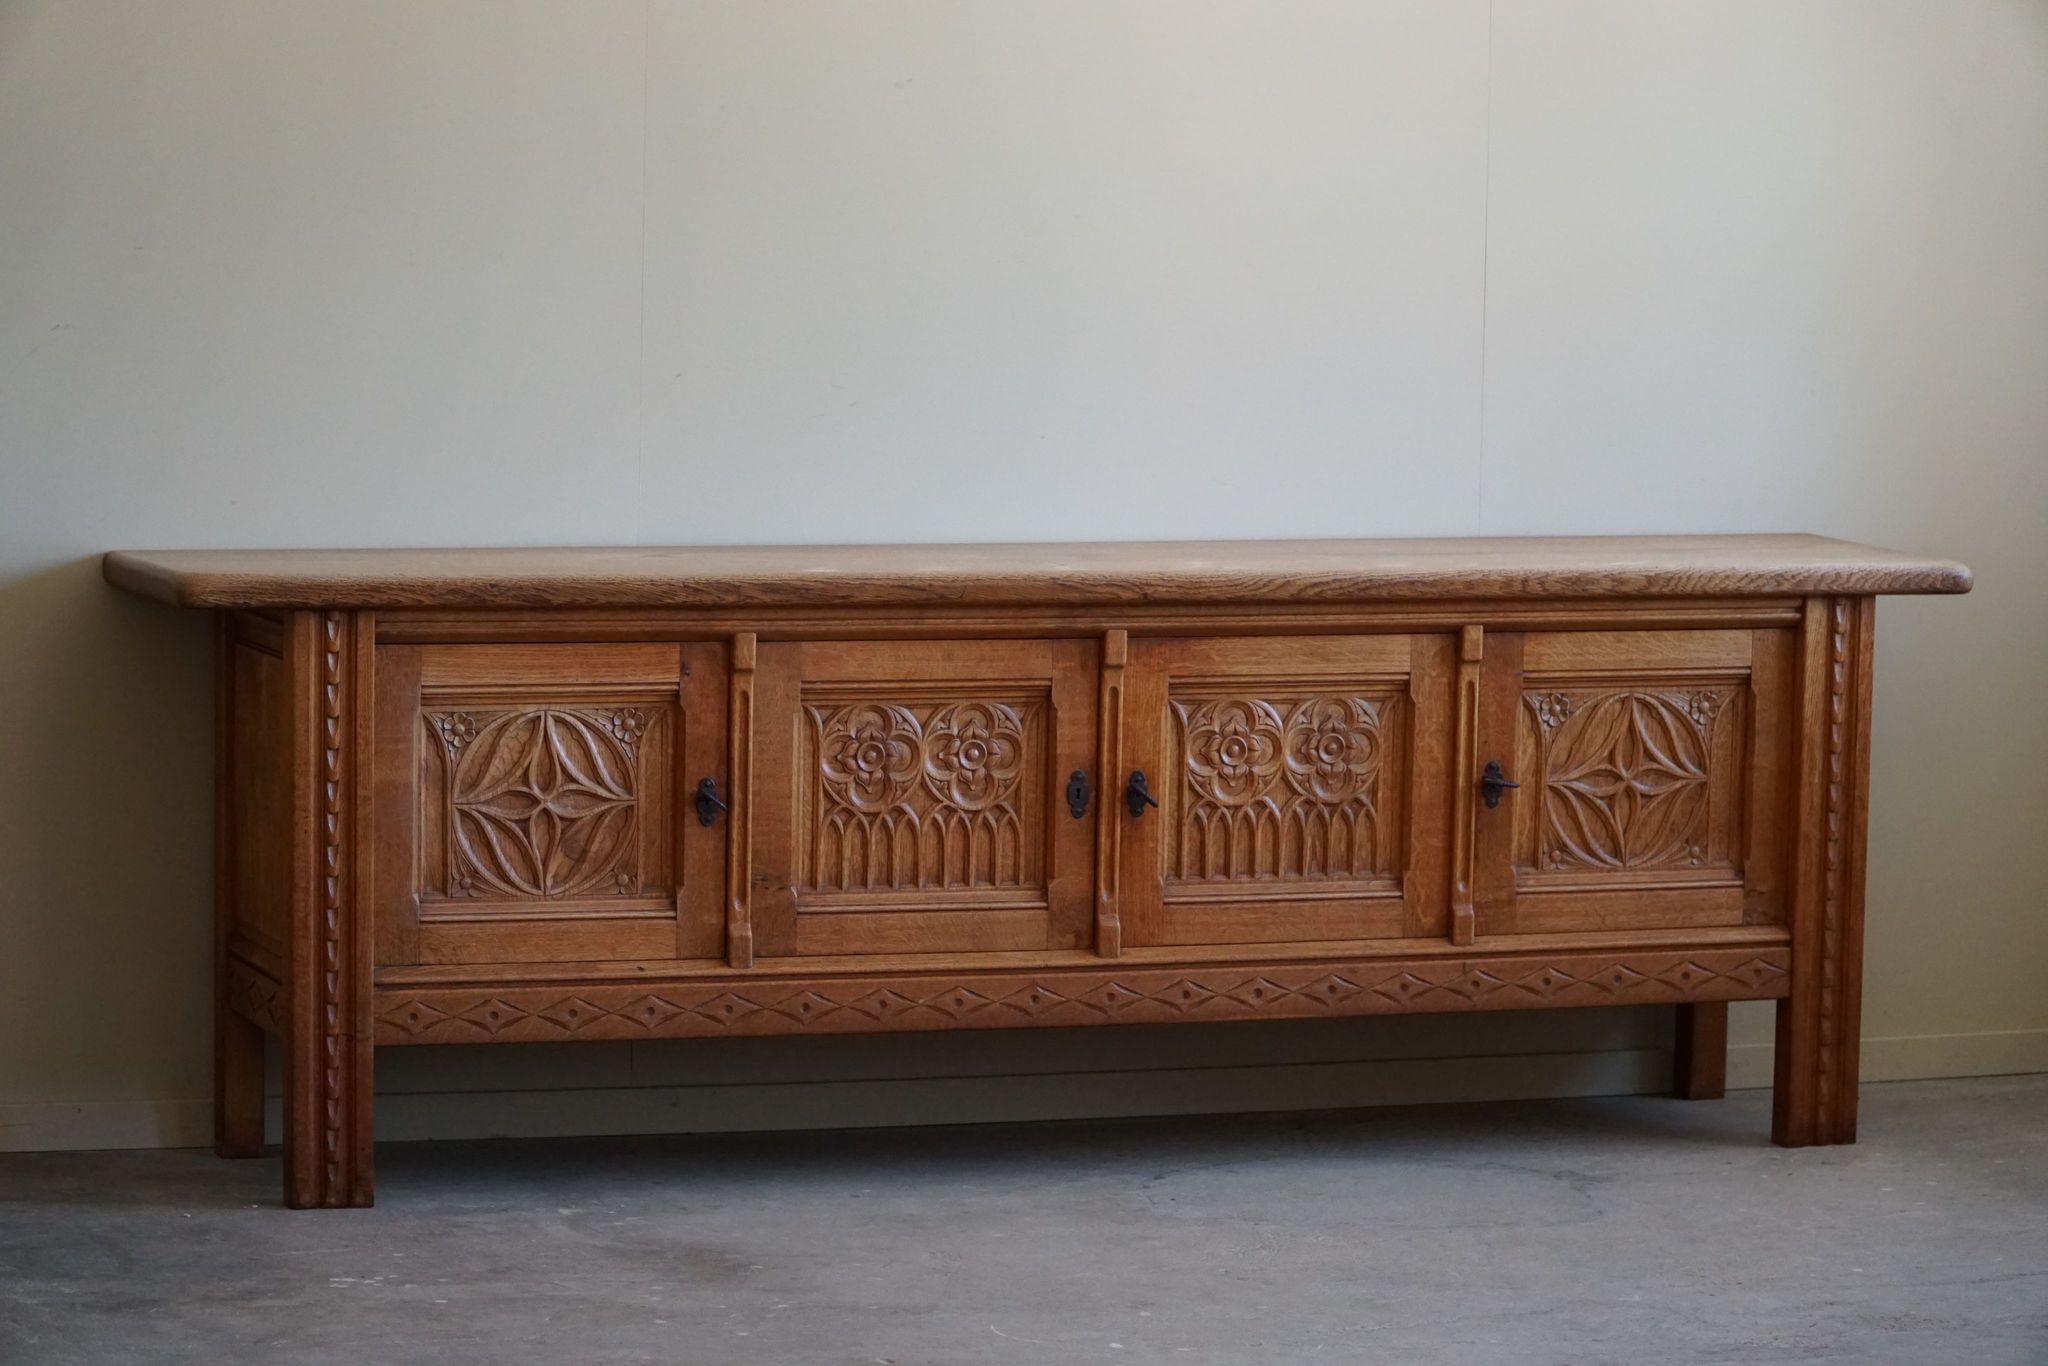 Mid Century Modern Sideboard in Oak, Handcrafted by a Danish Cabinetmaker, 1950s For Sale 3